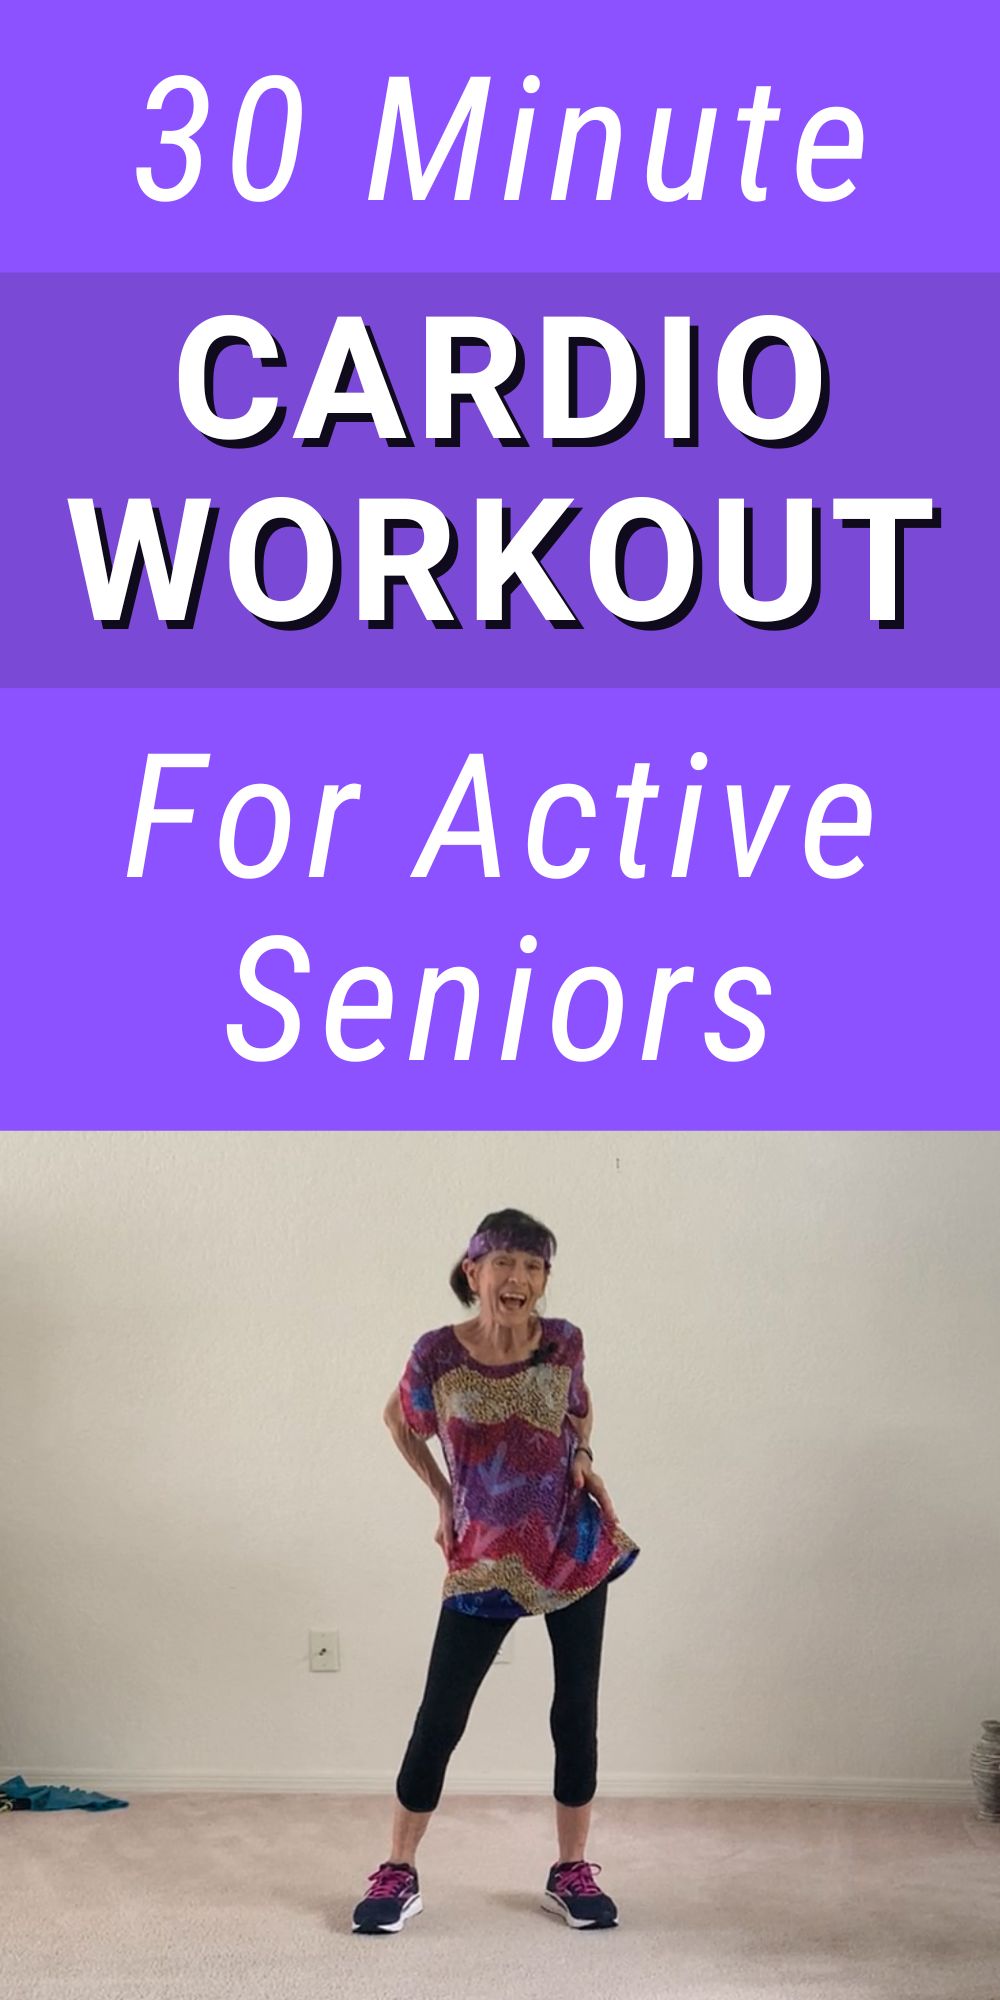 30 minute cardio workout for older adults